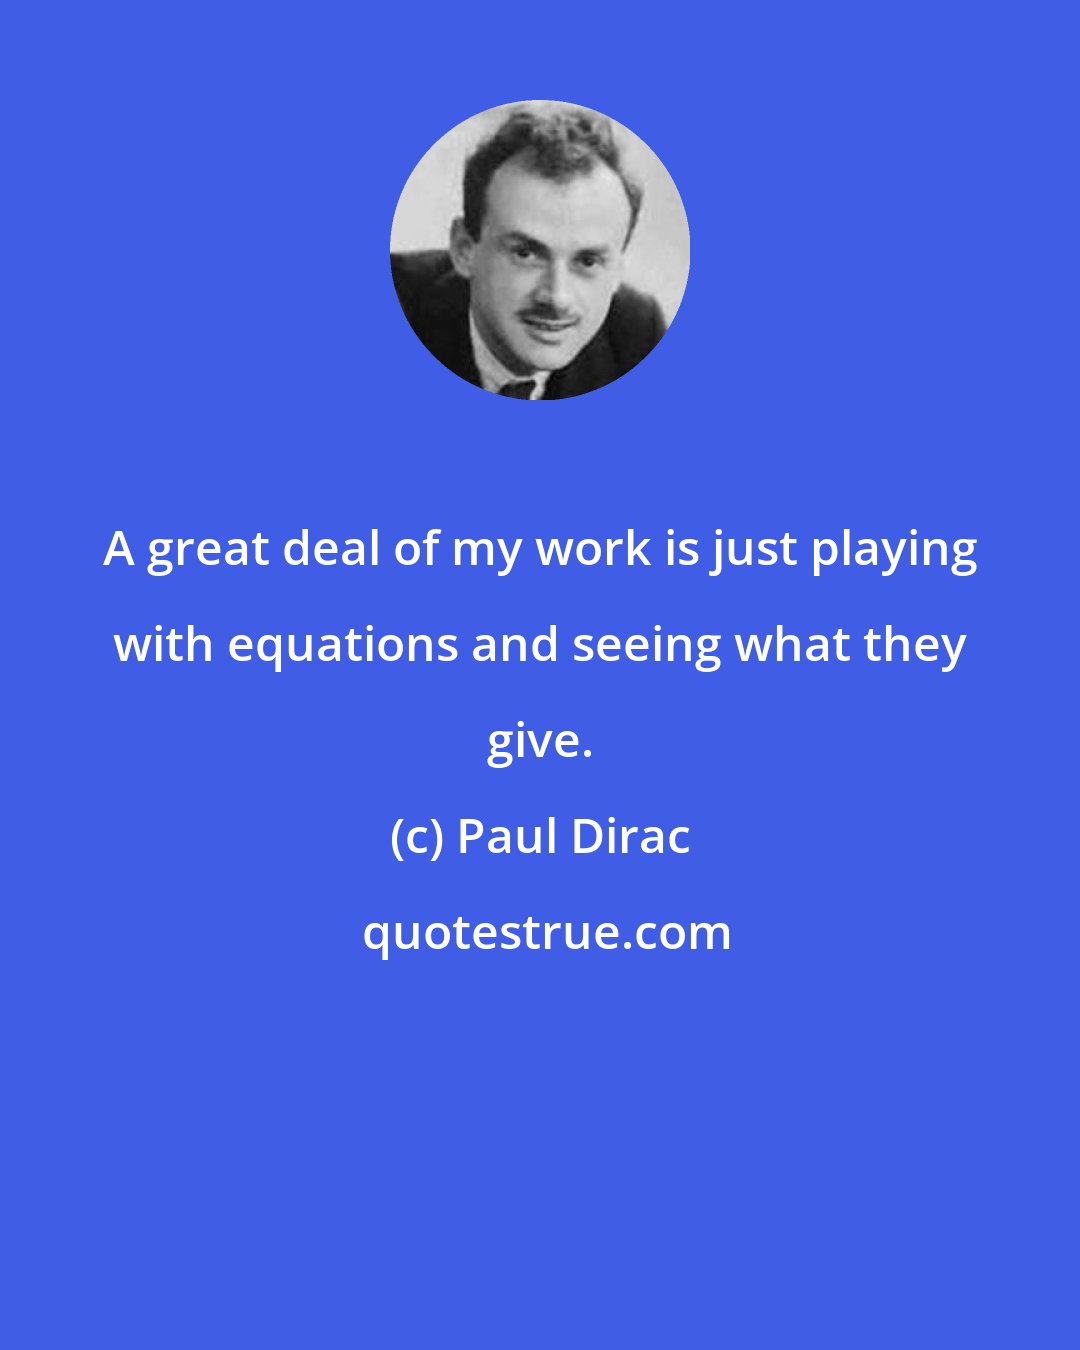 Paul Dirac: A great deal of my work is just playing with equations and seeing what they give.